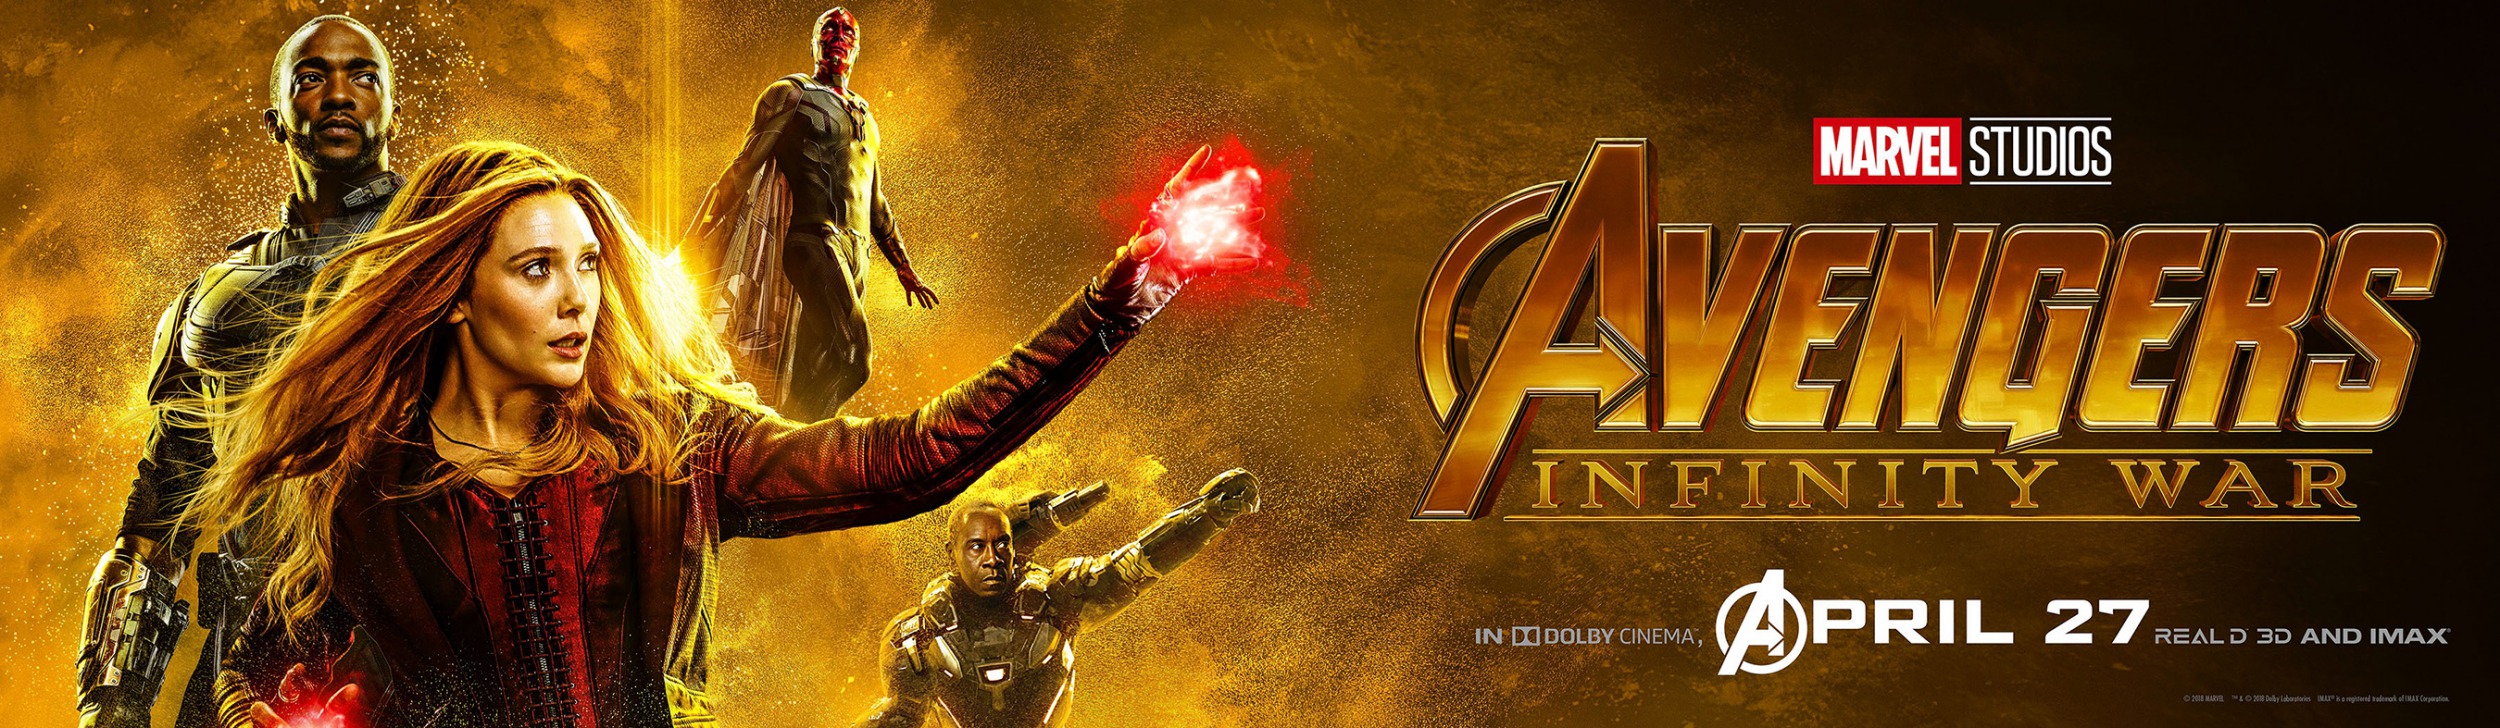 Mega Sized Movie Poster Image for Avengers: Infinity War (#44 of 45)